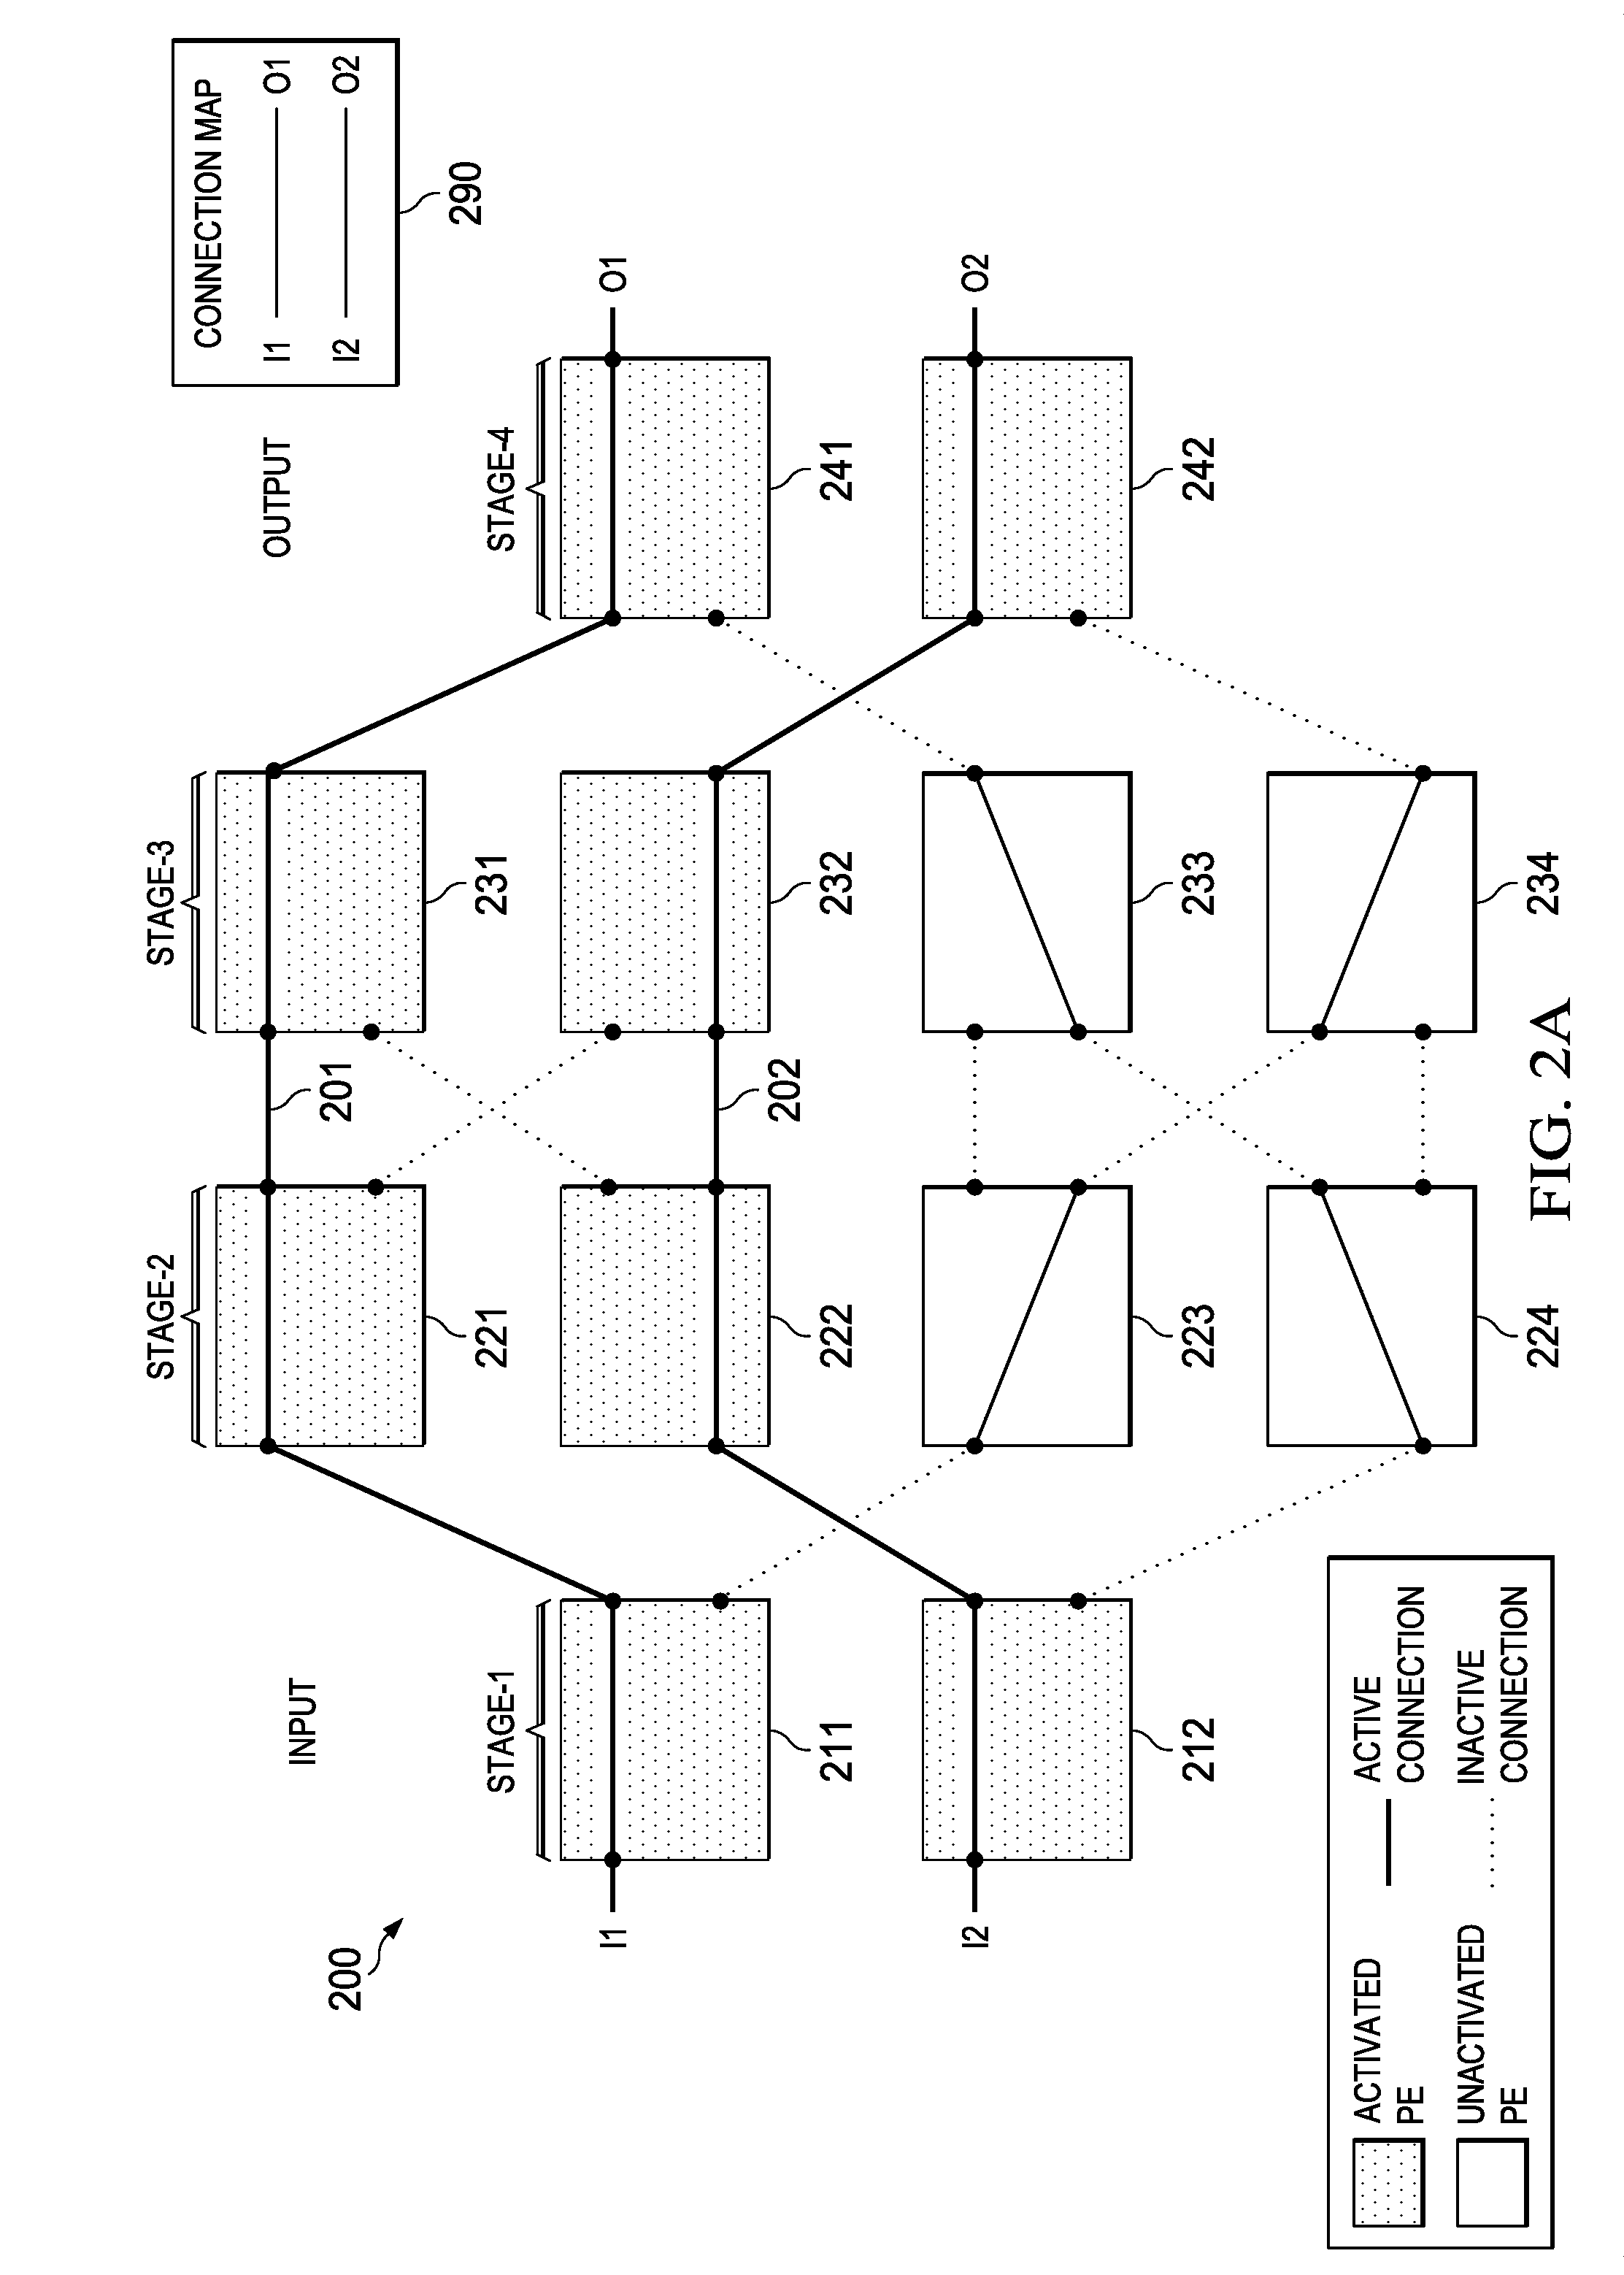 Method for Crosstalk and Power Optimization in Silicon Photonic Based Switch Matrices